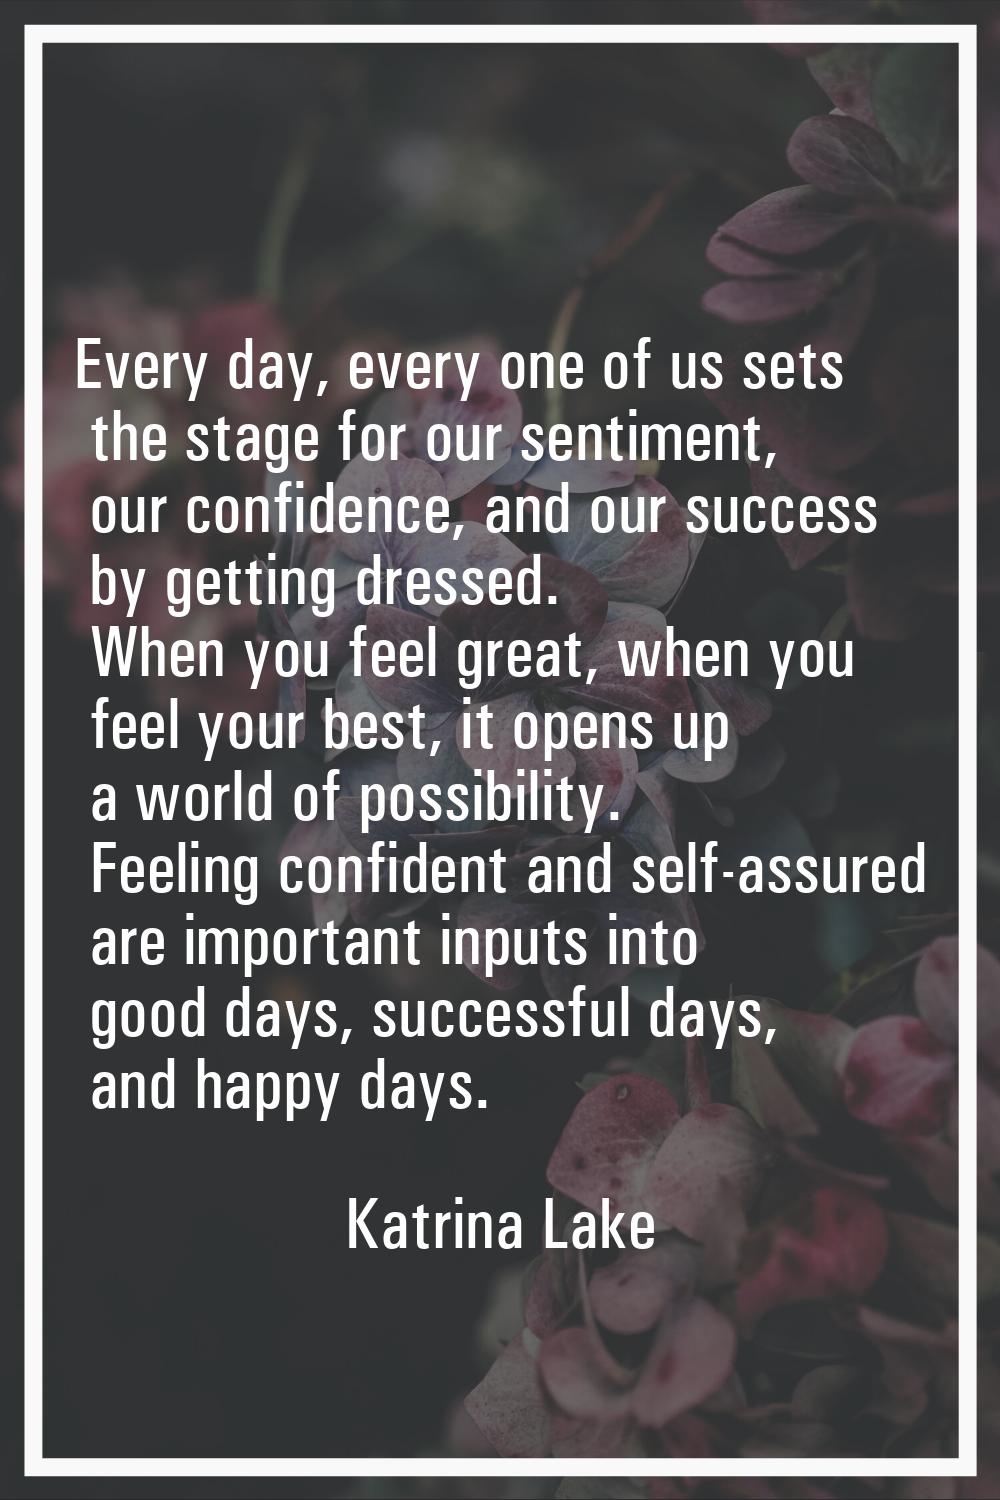 Every day, every one of us sets the stage for our sentiment, our confidence, and our success by get